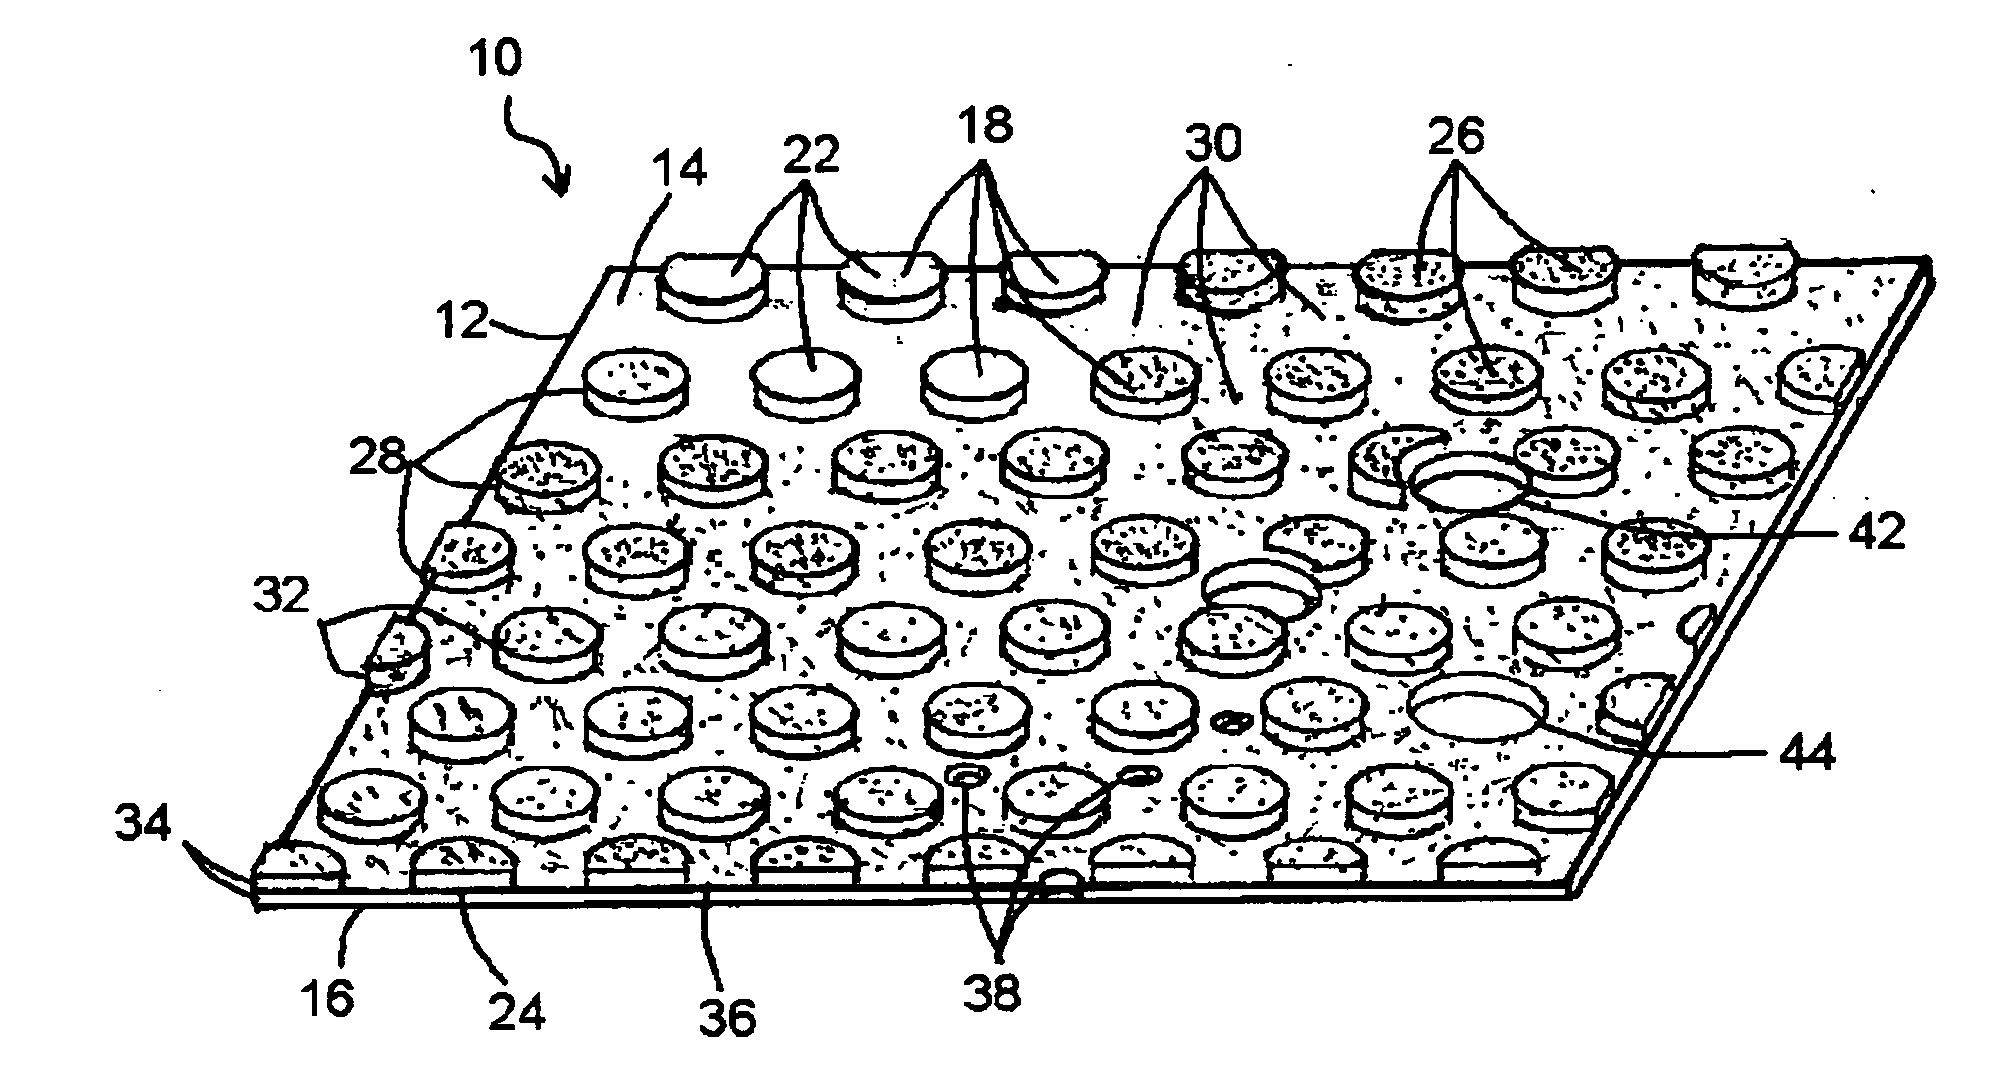 Abrasive article and method of making